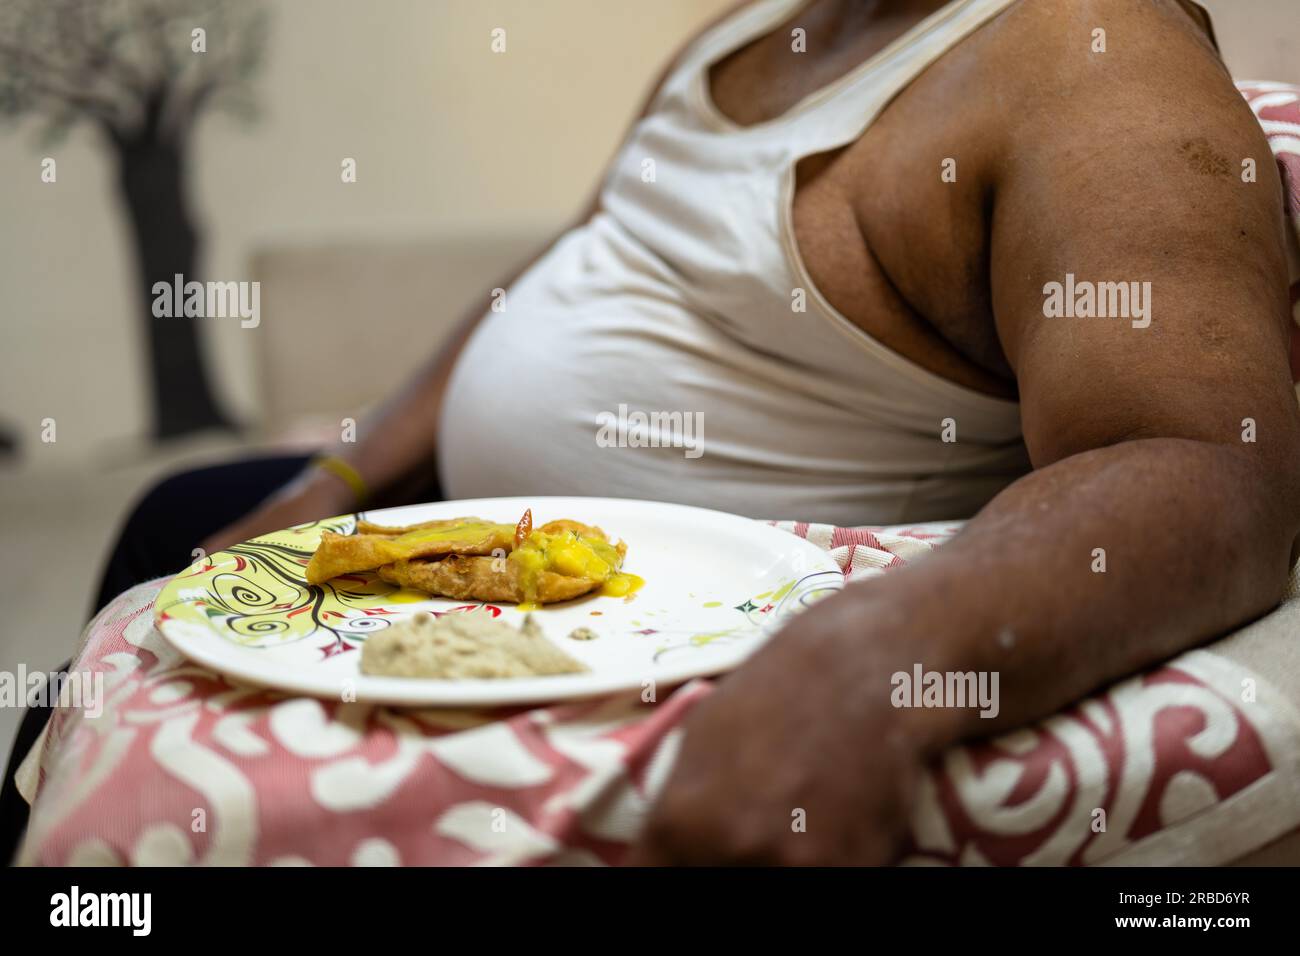 A stock photo of a fat man sitting at a sofa, focusing on a plate of food. The man's belly is out of focus, Stock Photo